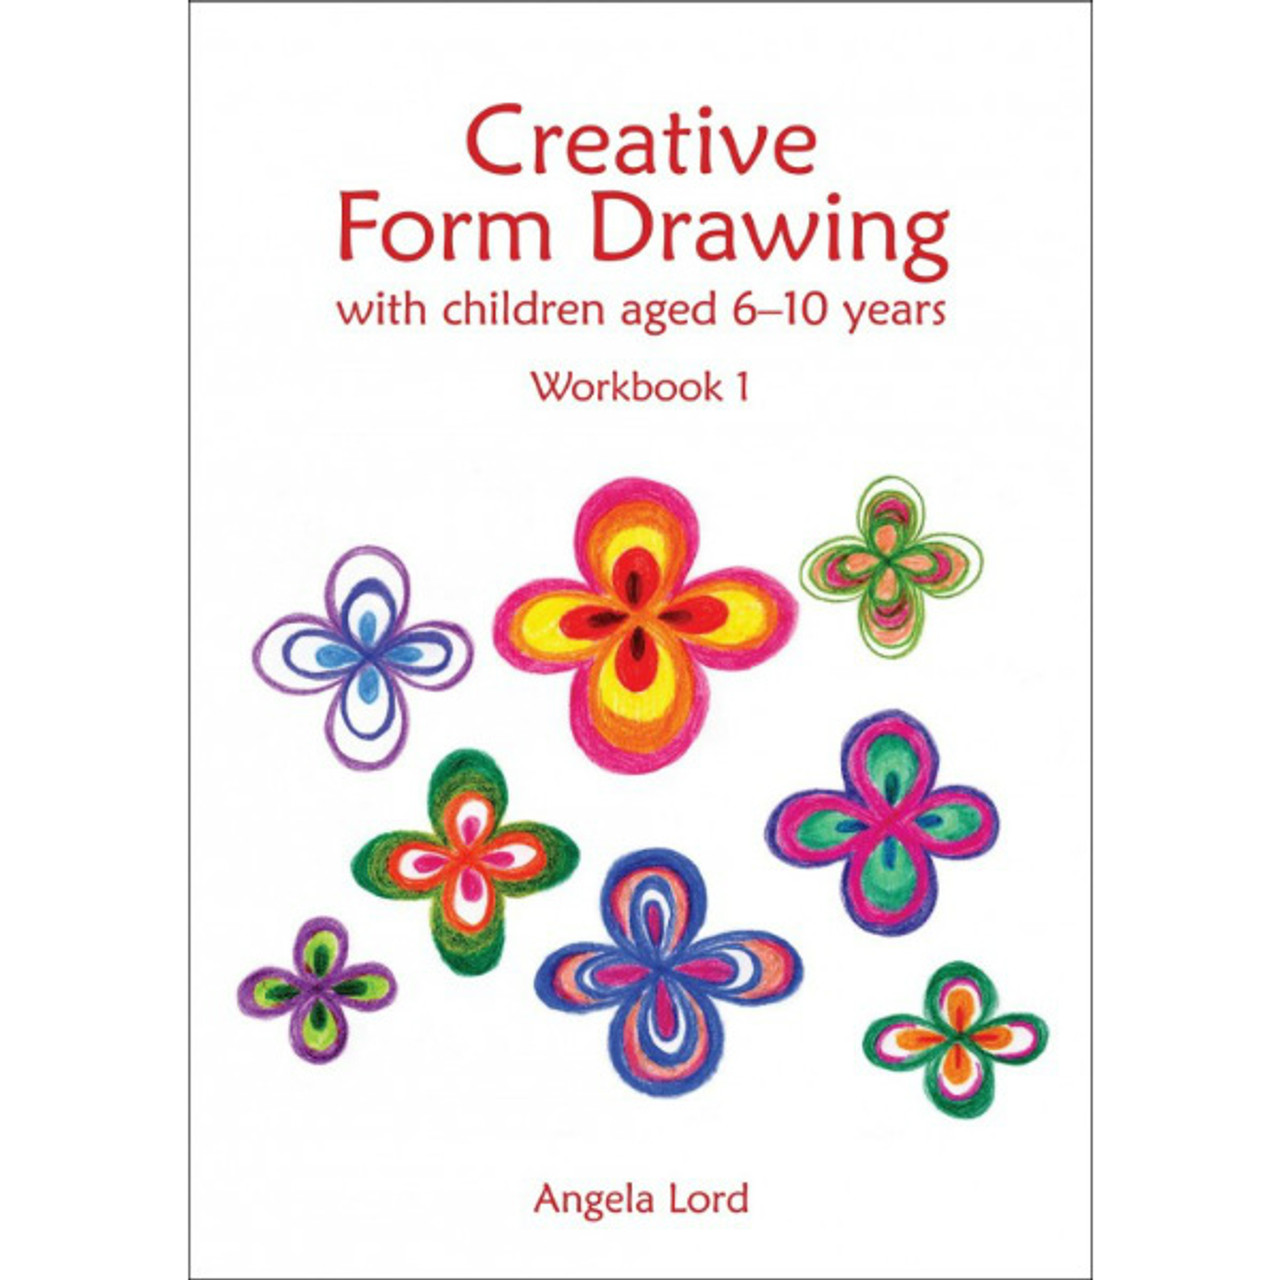 Years　Drawing　Creative　Form　with　Children　A　Aged　10　Child's　Dream